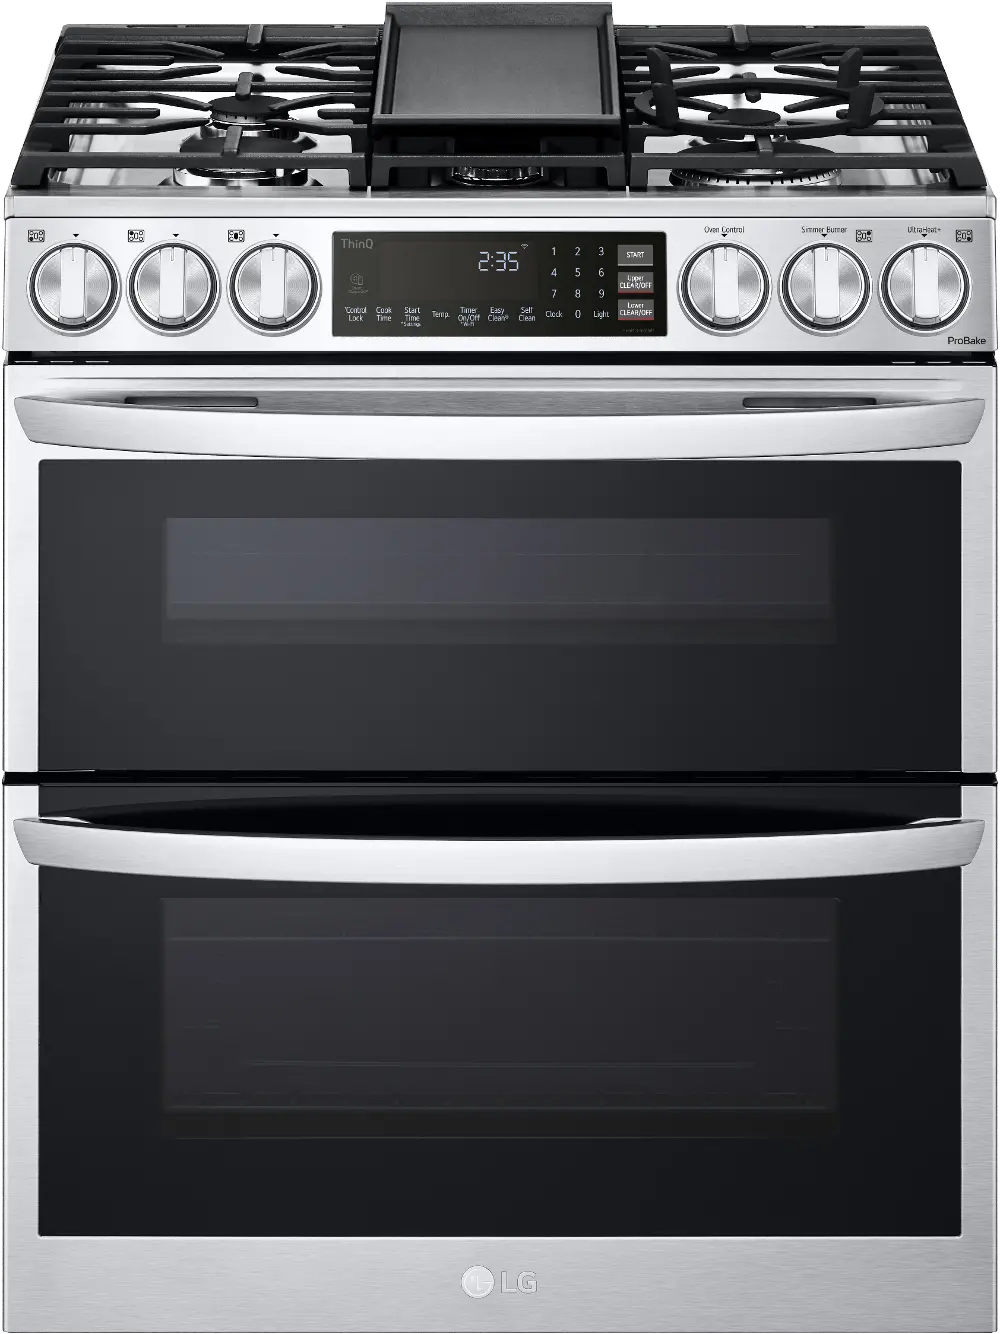 LTGL6937F LG 6.9 cu ft Double Oven Gas Range with InstaView - Stainless Steel-1